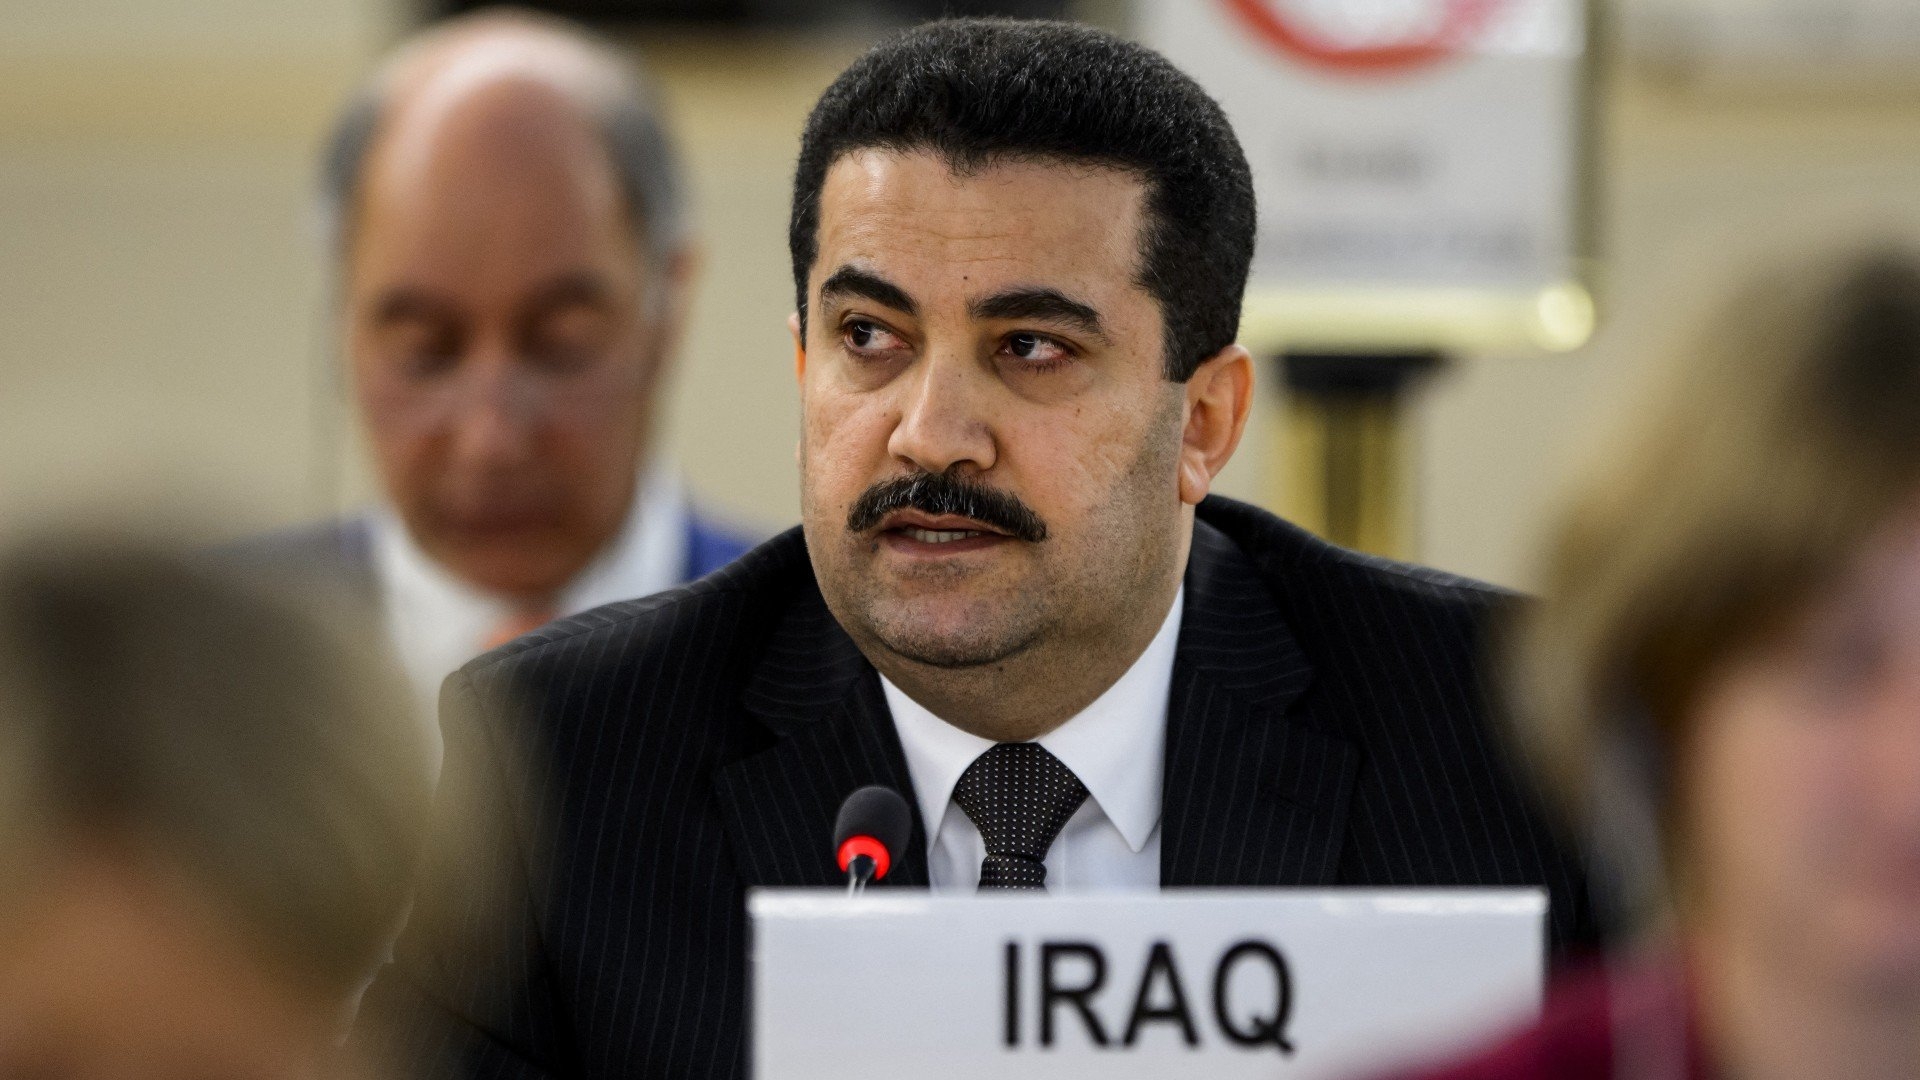 Mohammed Shia al-Sudani speaks at a special session of the United Nations Human Rights Council on 1 September 2014 in Geneva, Switzerland (AFP)